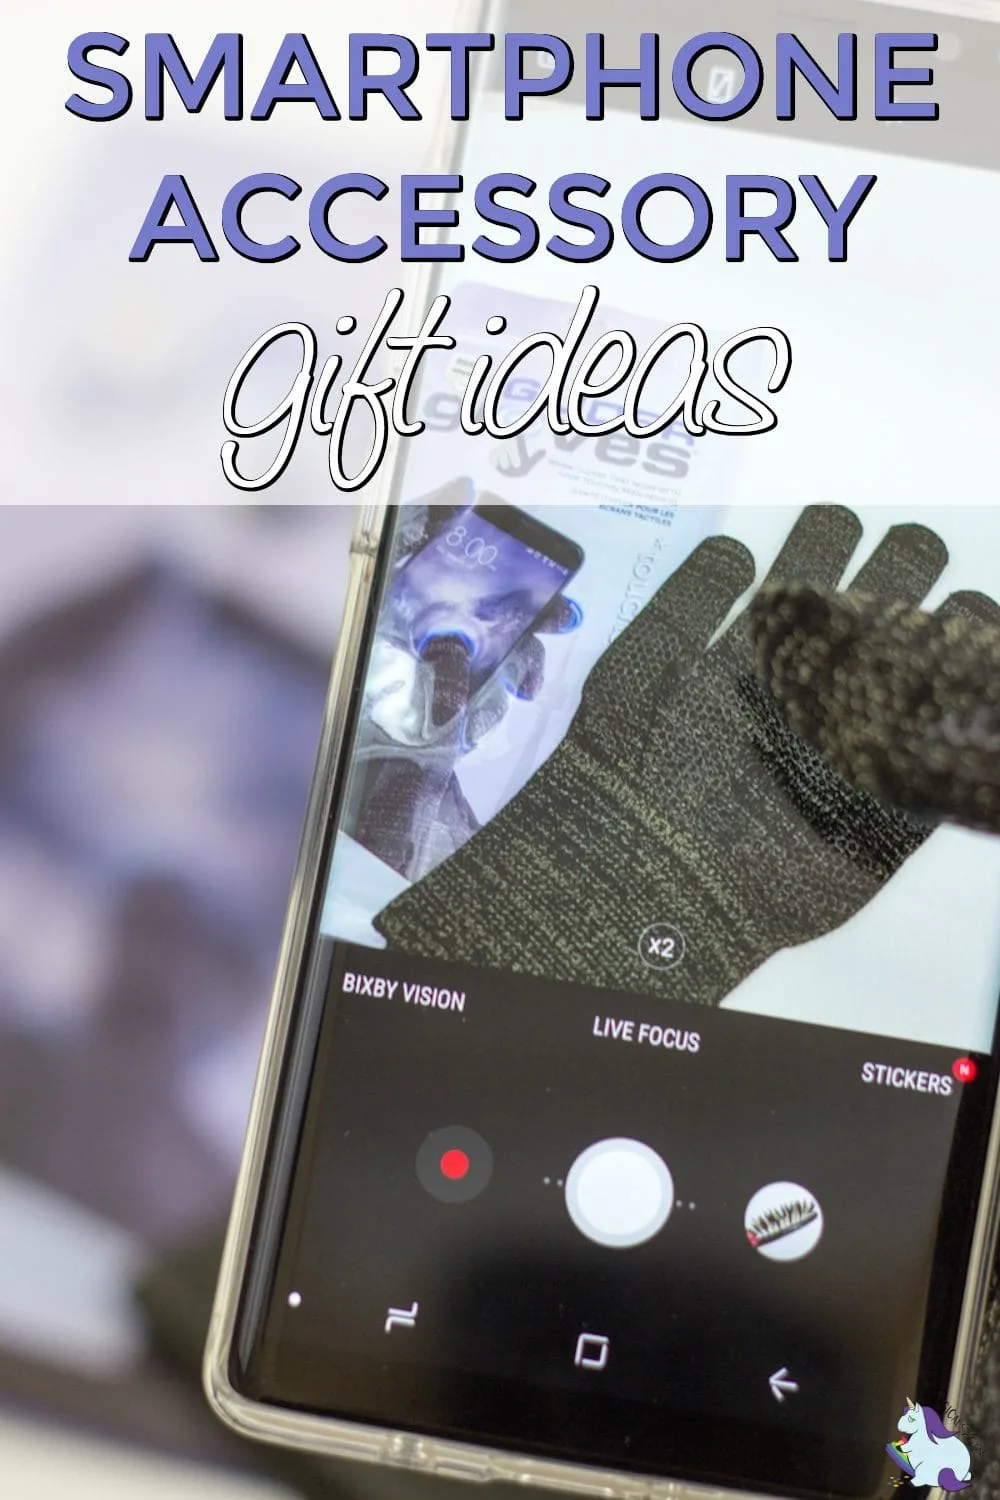 Best Smartphone Accessories to Give as Gifts